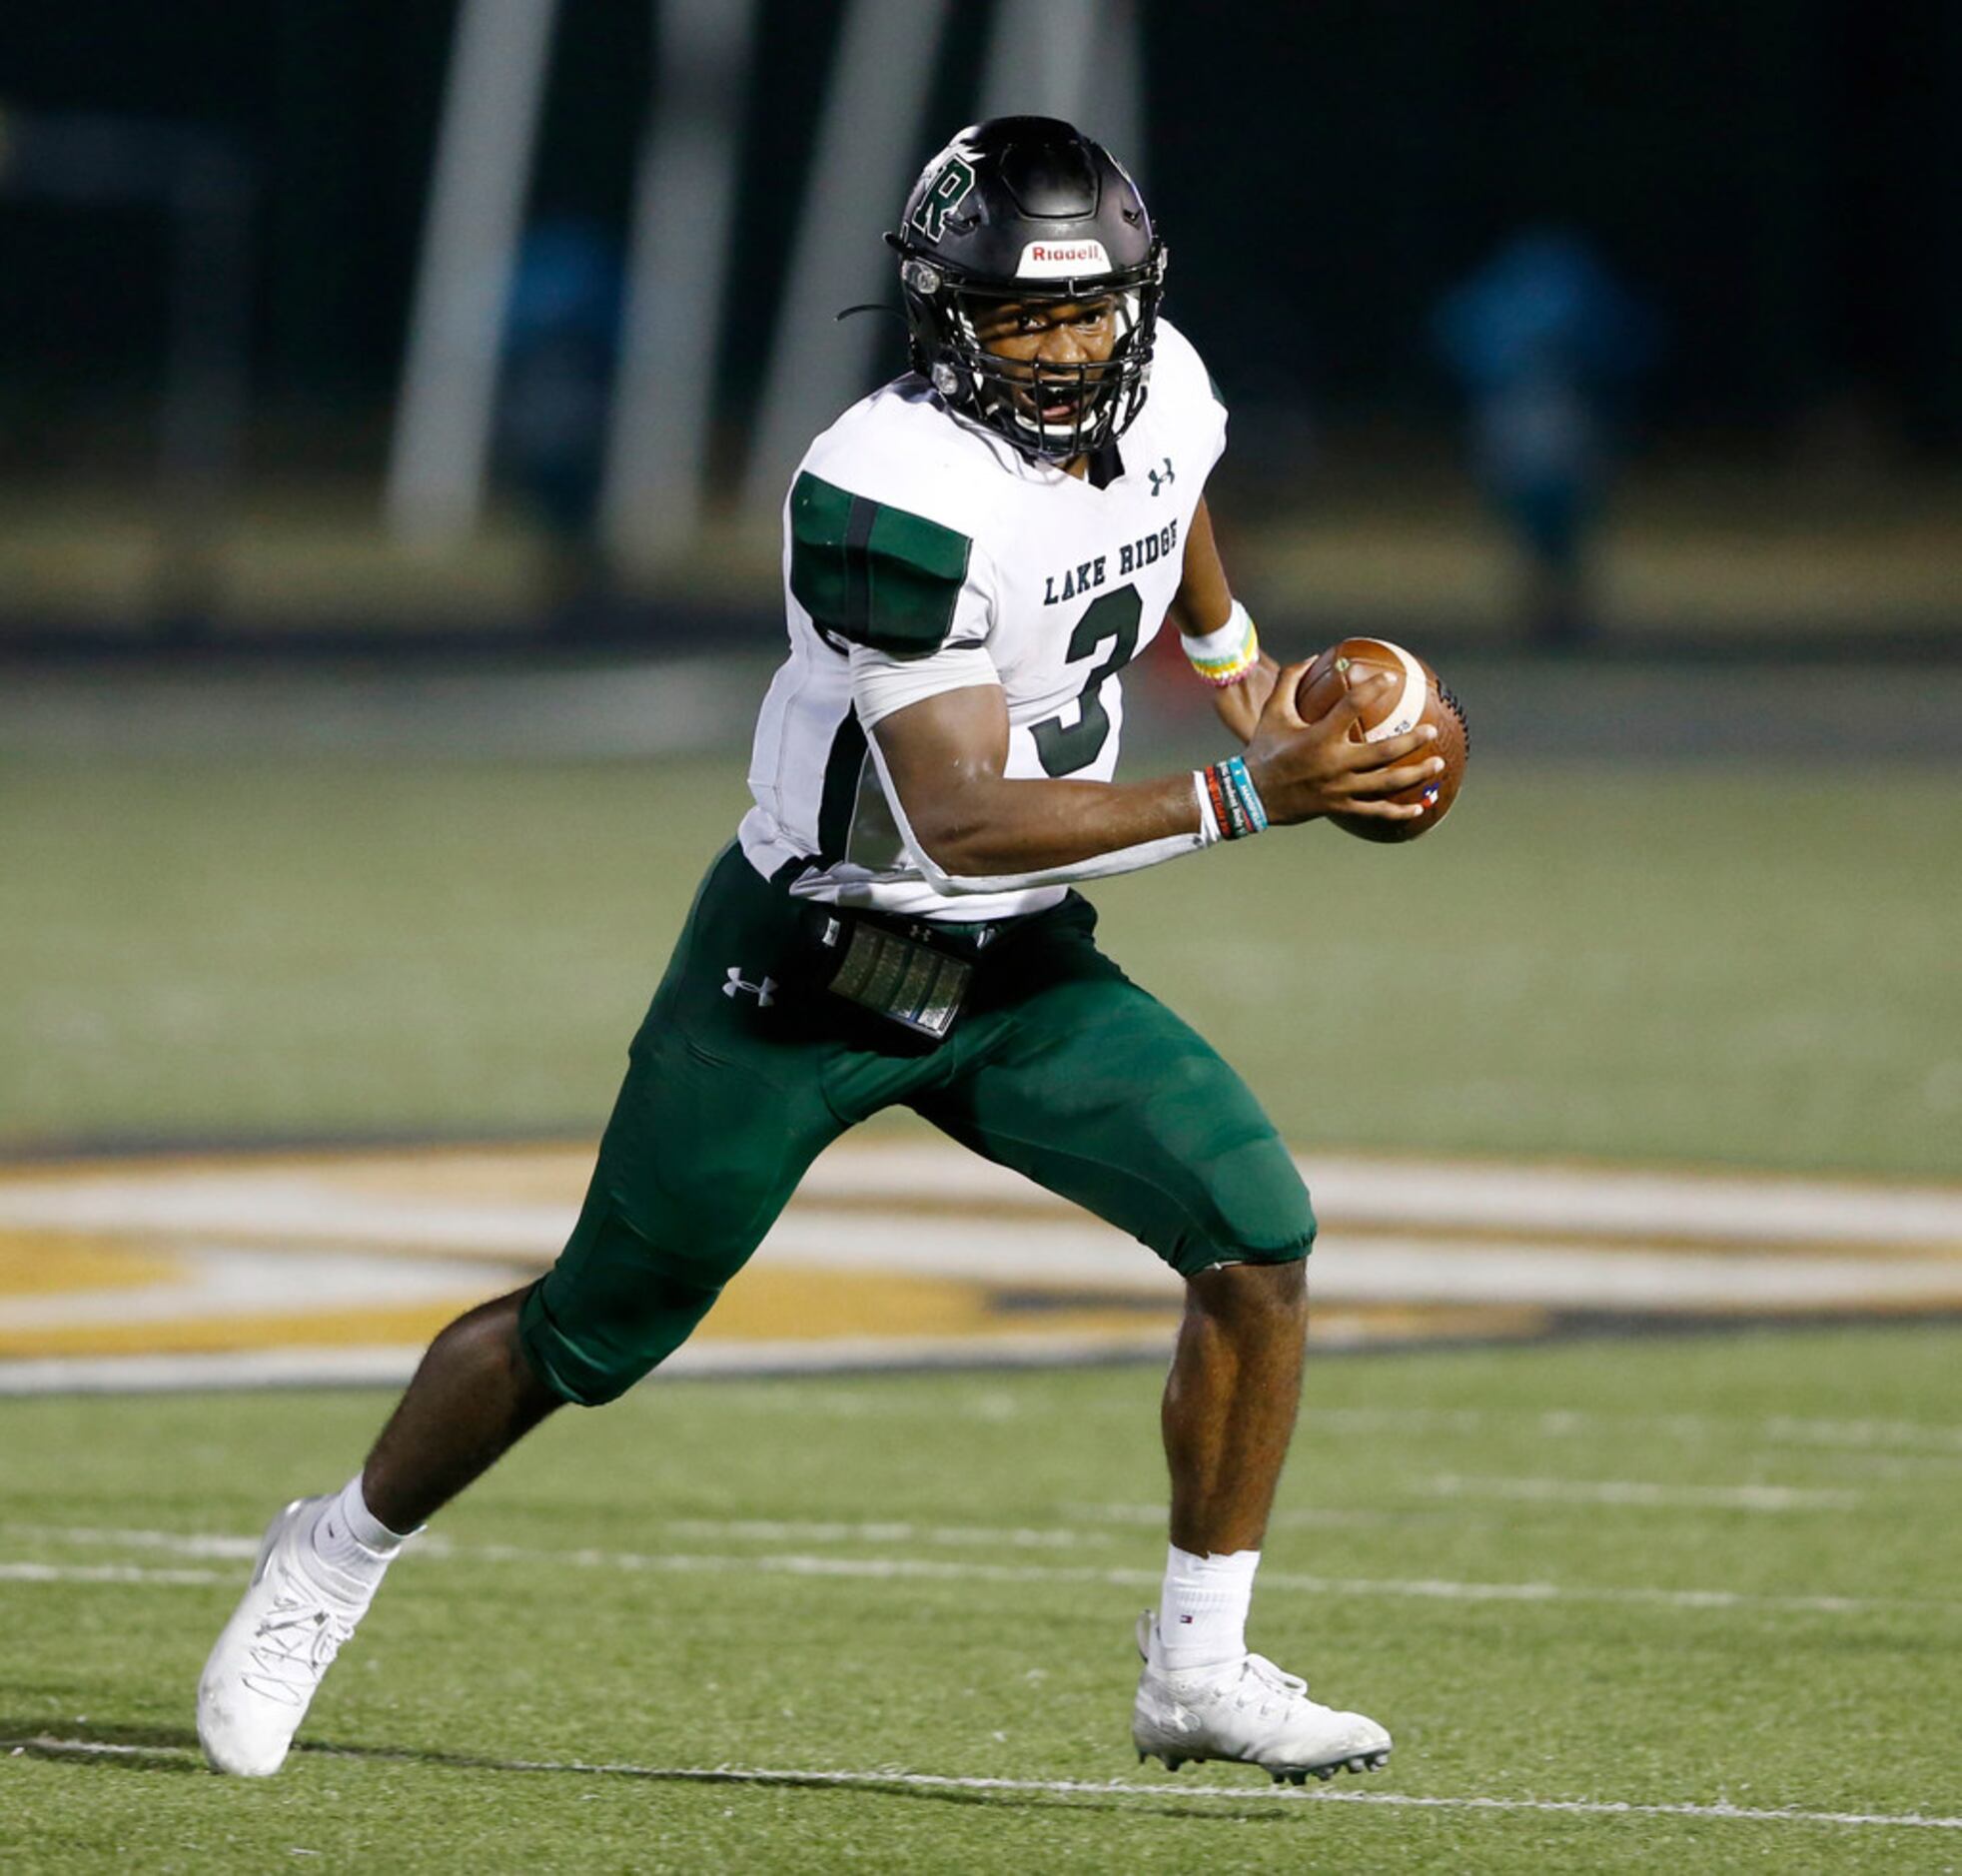 Mansfield Lake Ridge's Adrian Haawkins (3) looks to run in a game against DeSoto during the...